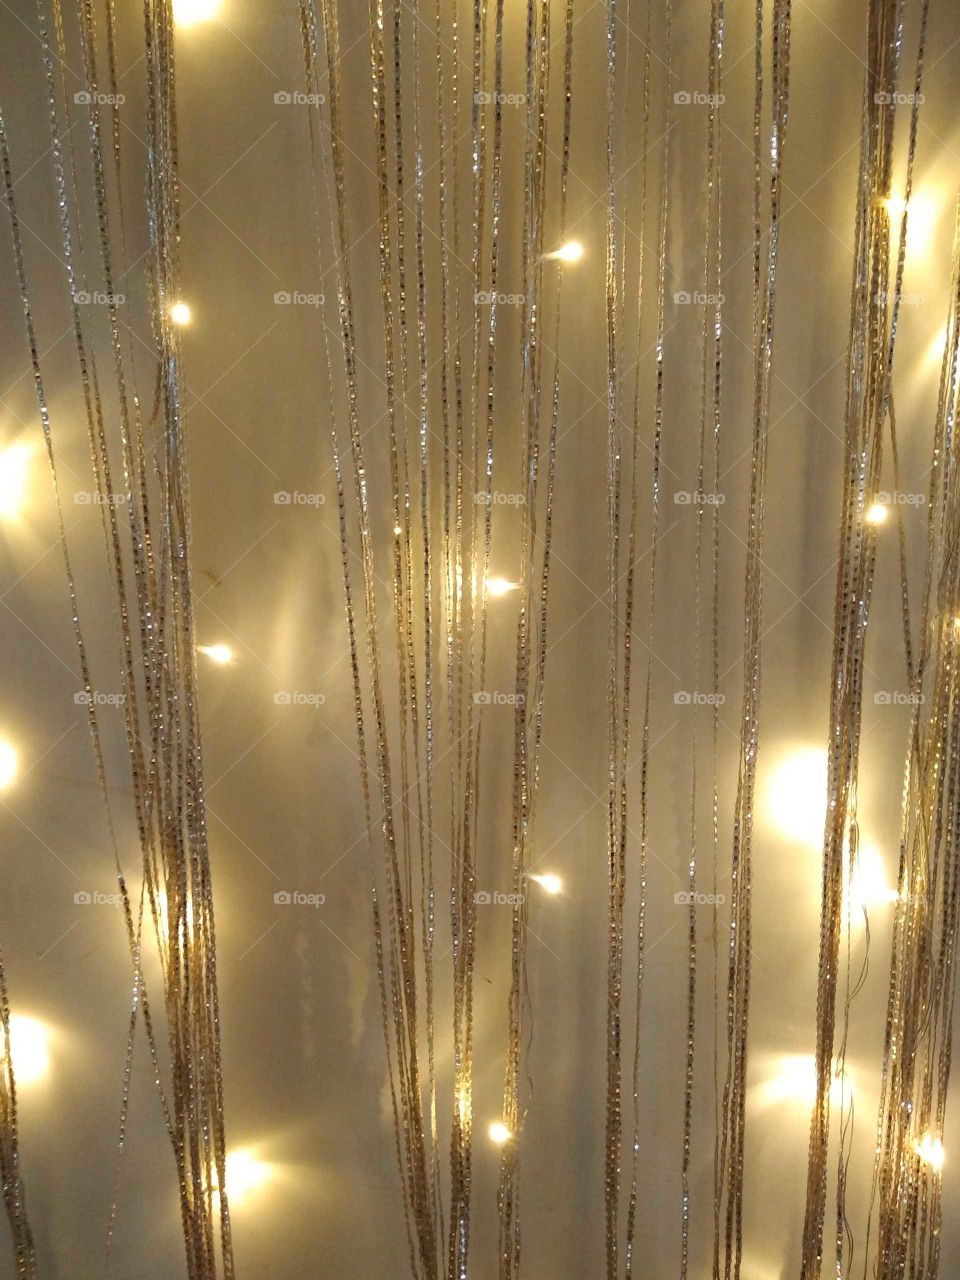 decorative lighting in a birthday party